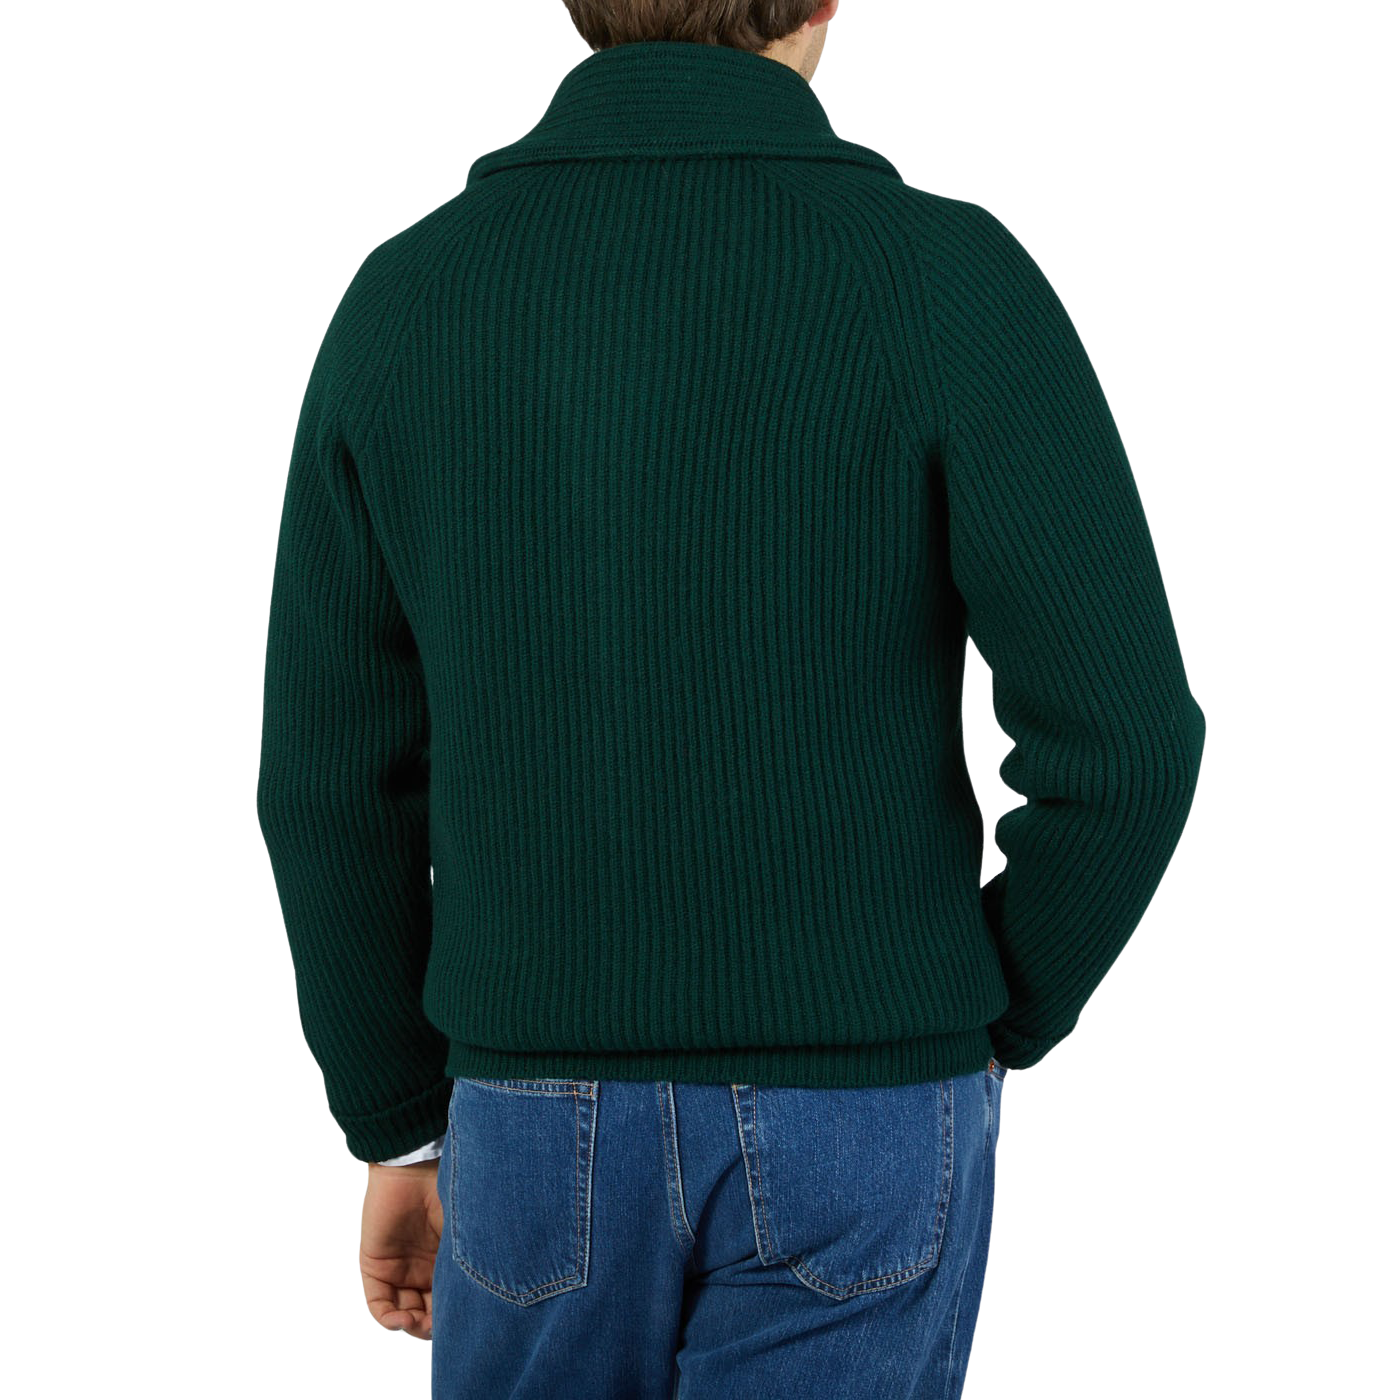 The man is seen from the back wearing a Tartan Green Lambswool Shawl Collar Cardigan by William Lockie.